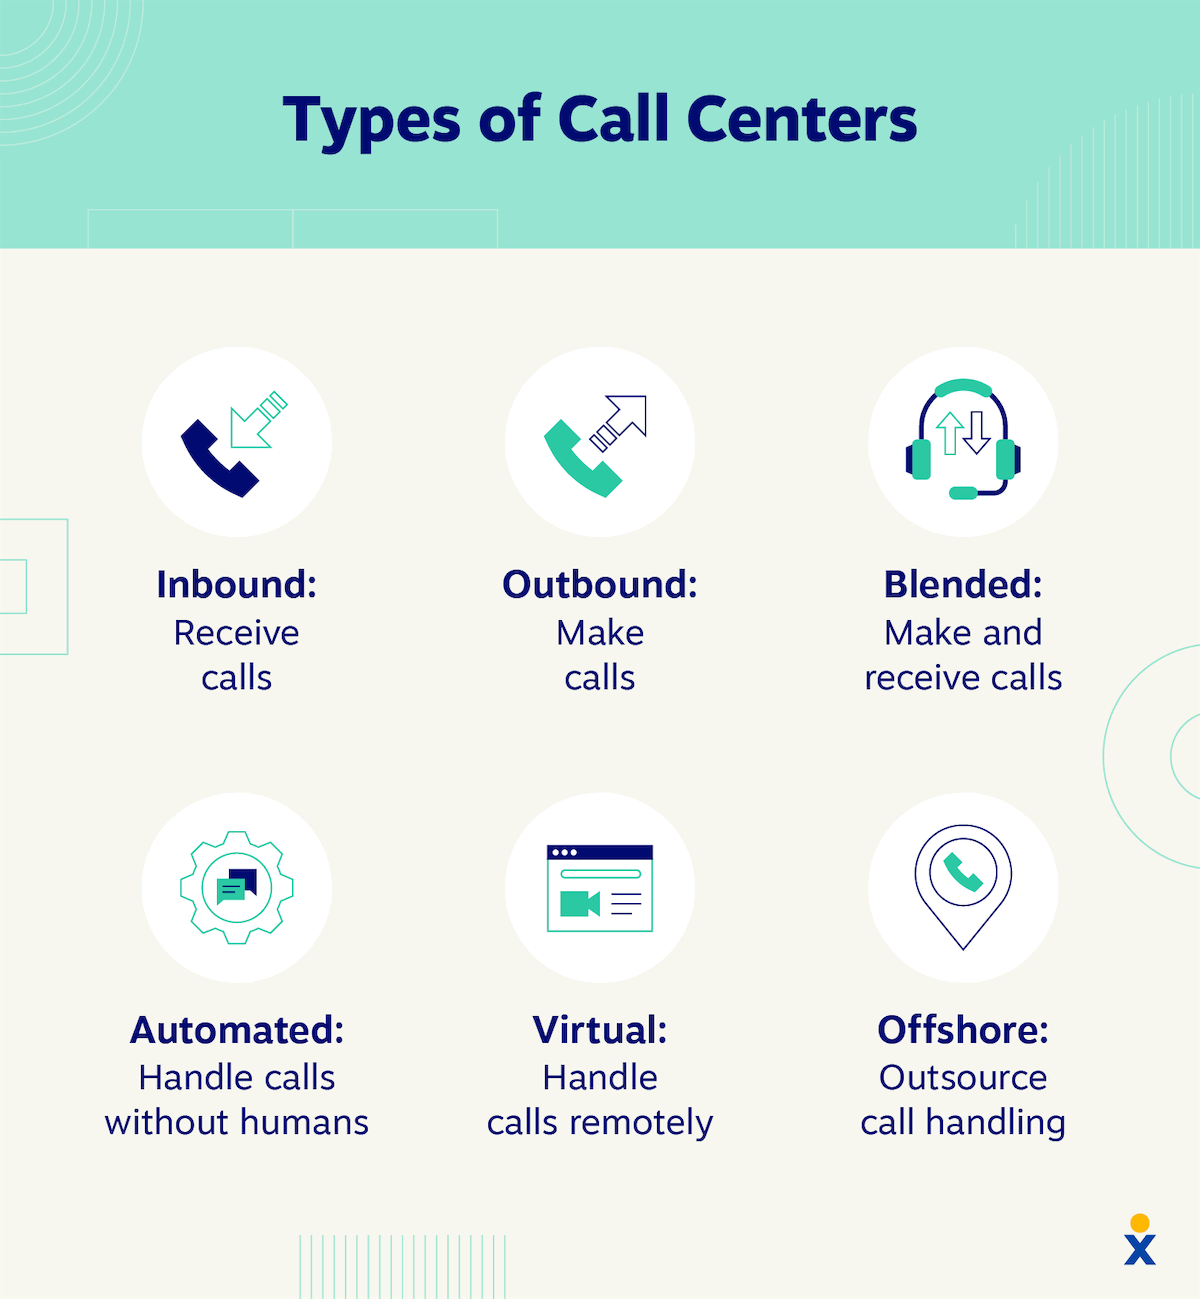 Types of call centers, including inbound, outbound, blended, automated, virtual, and offshore.